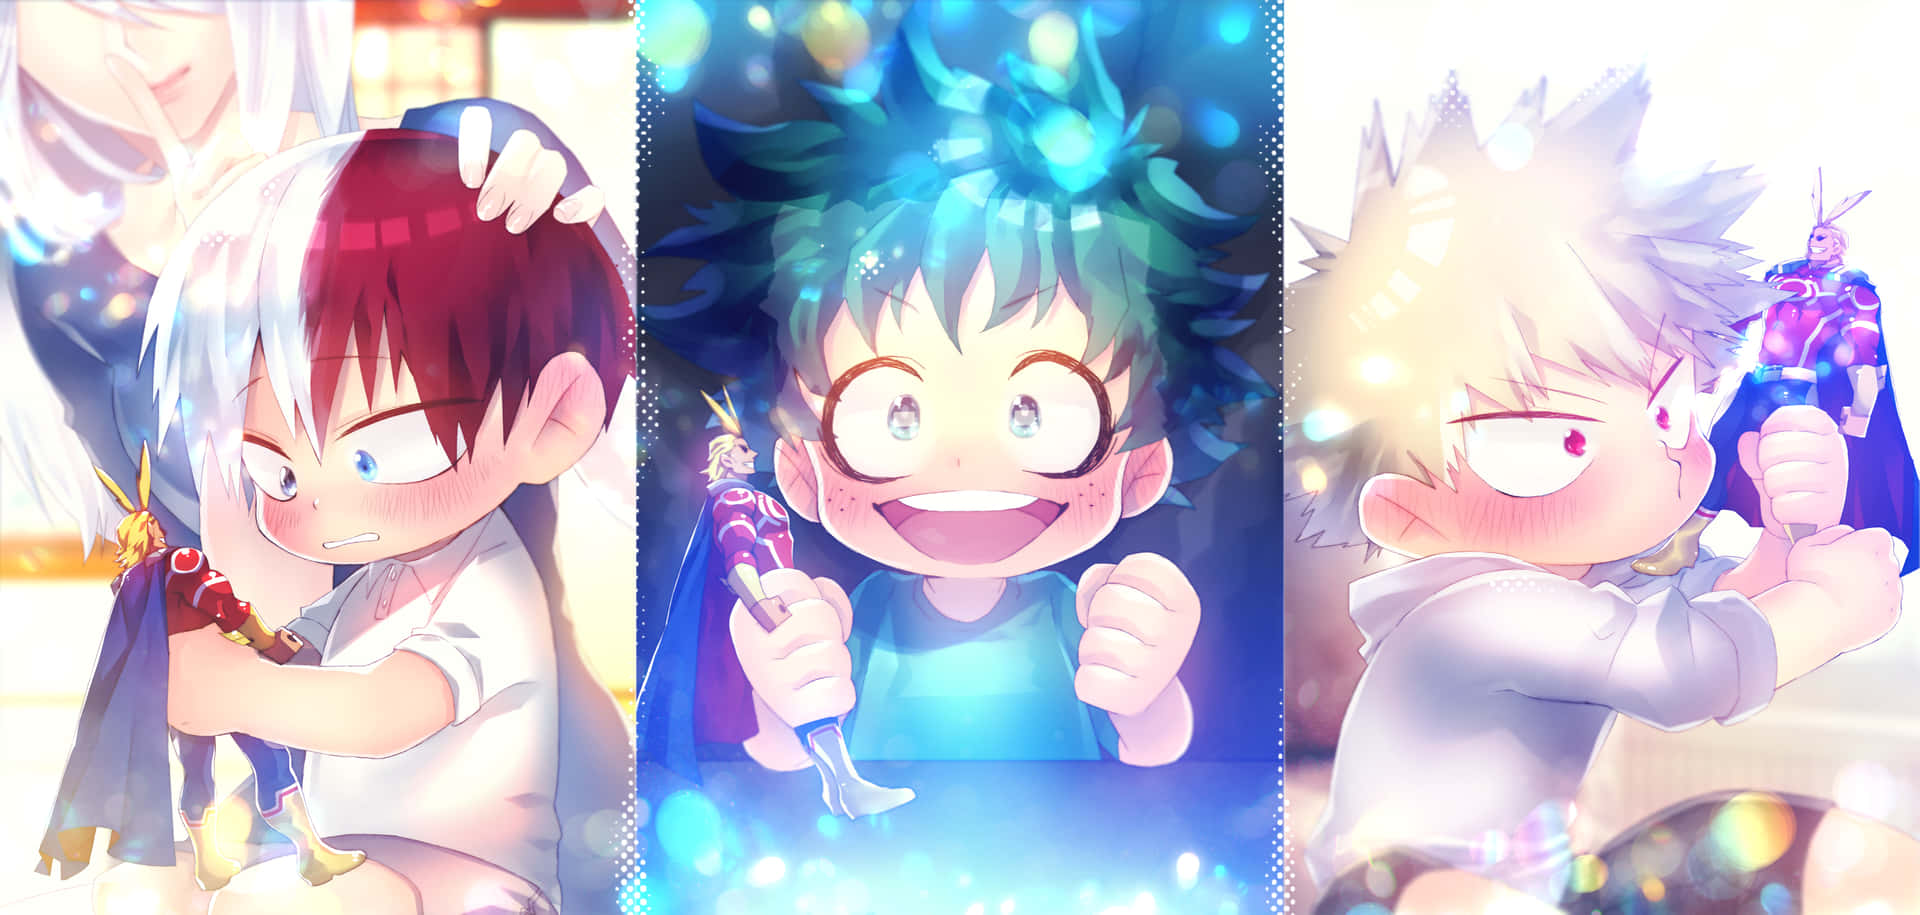 " Baby Deku, ready to leap into action!" Wallpaper